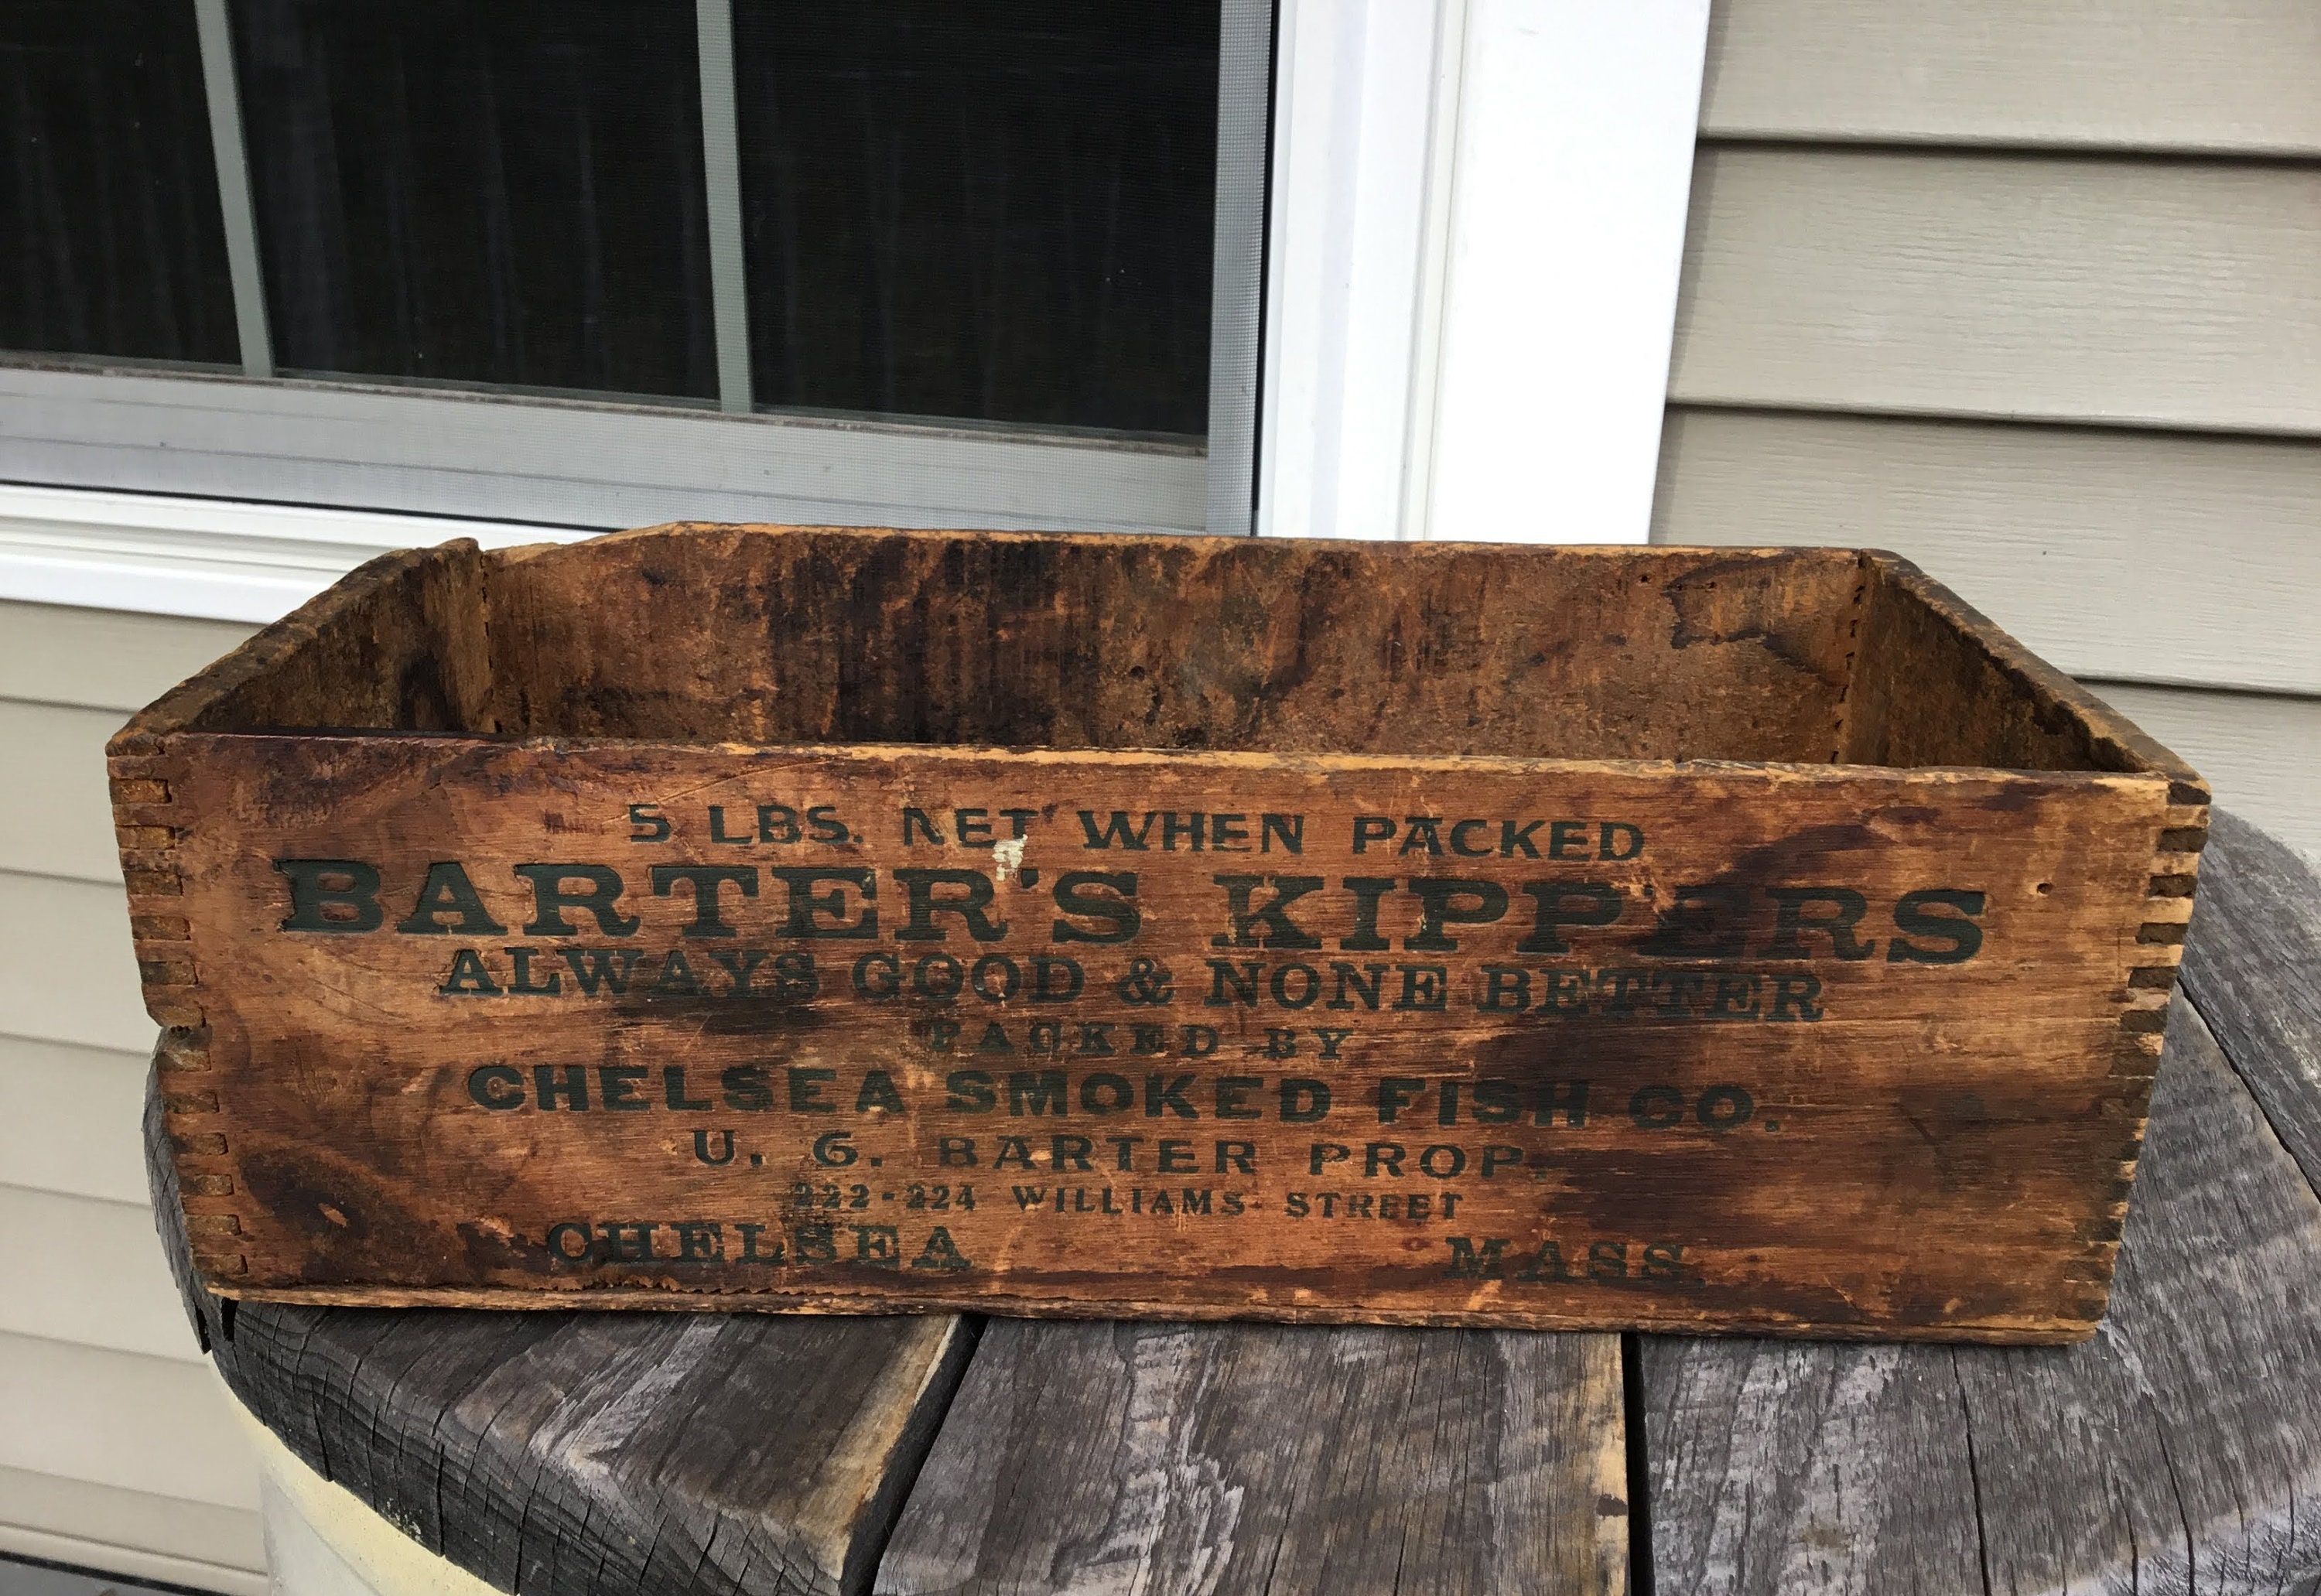 Antique Advertising Barter's Kippers Wooden Shipping Box Chelsea Mass  Smoked Fish Co -  Canada